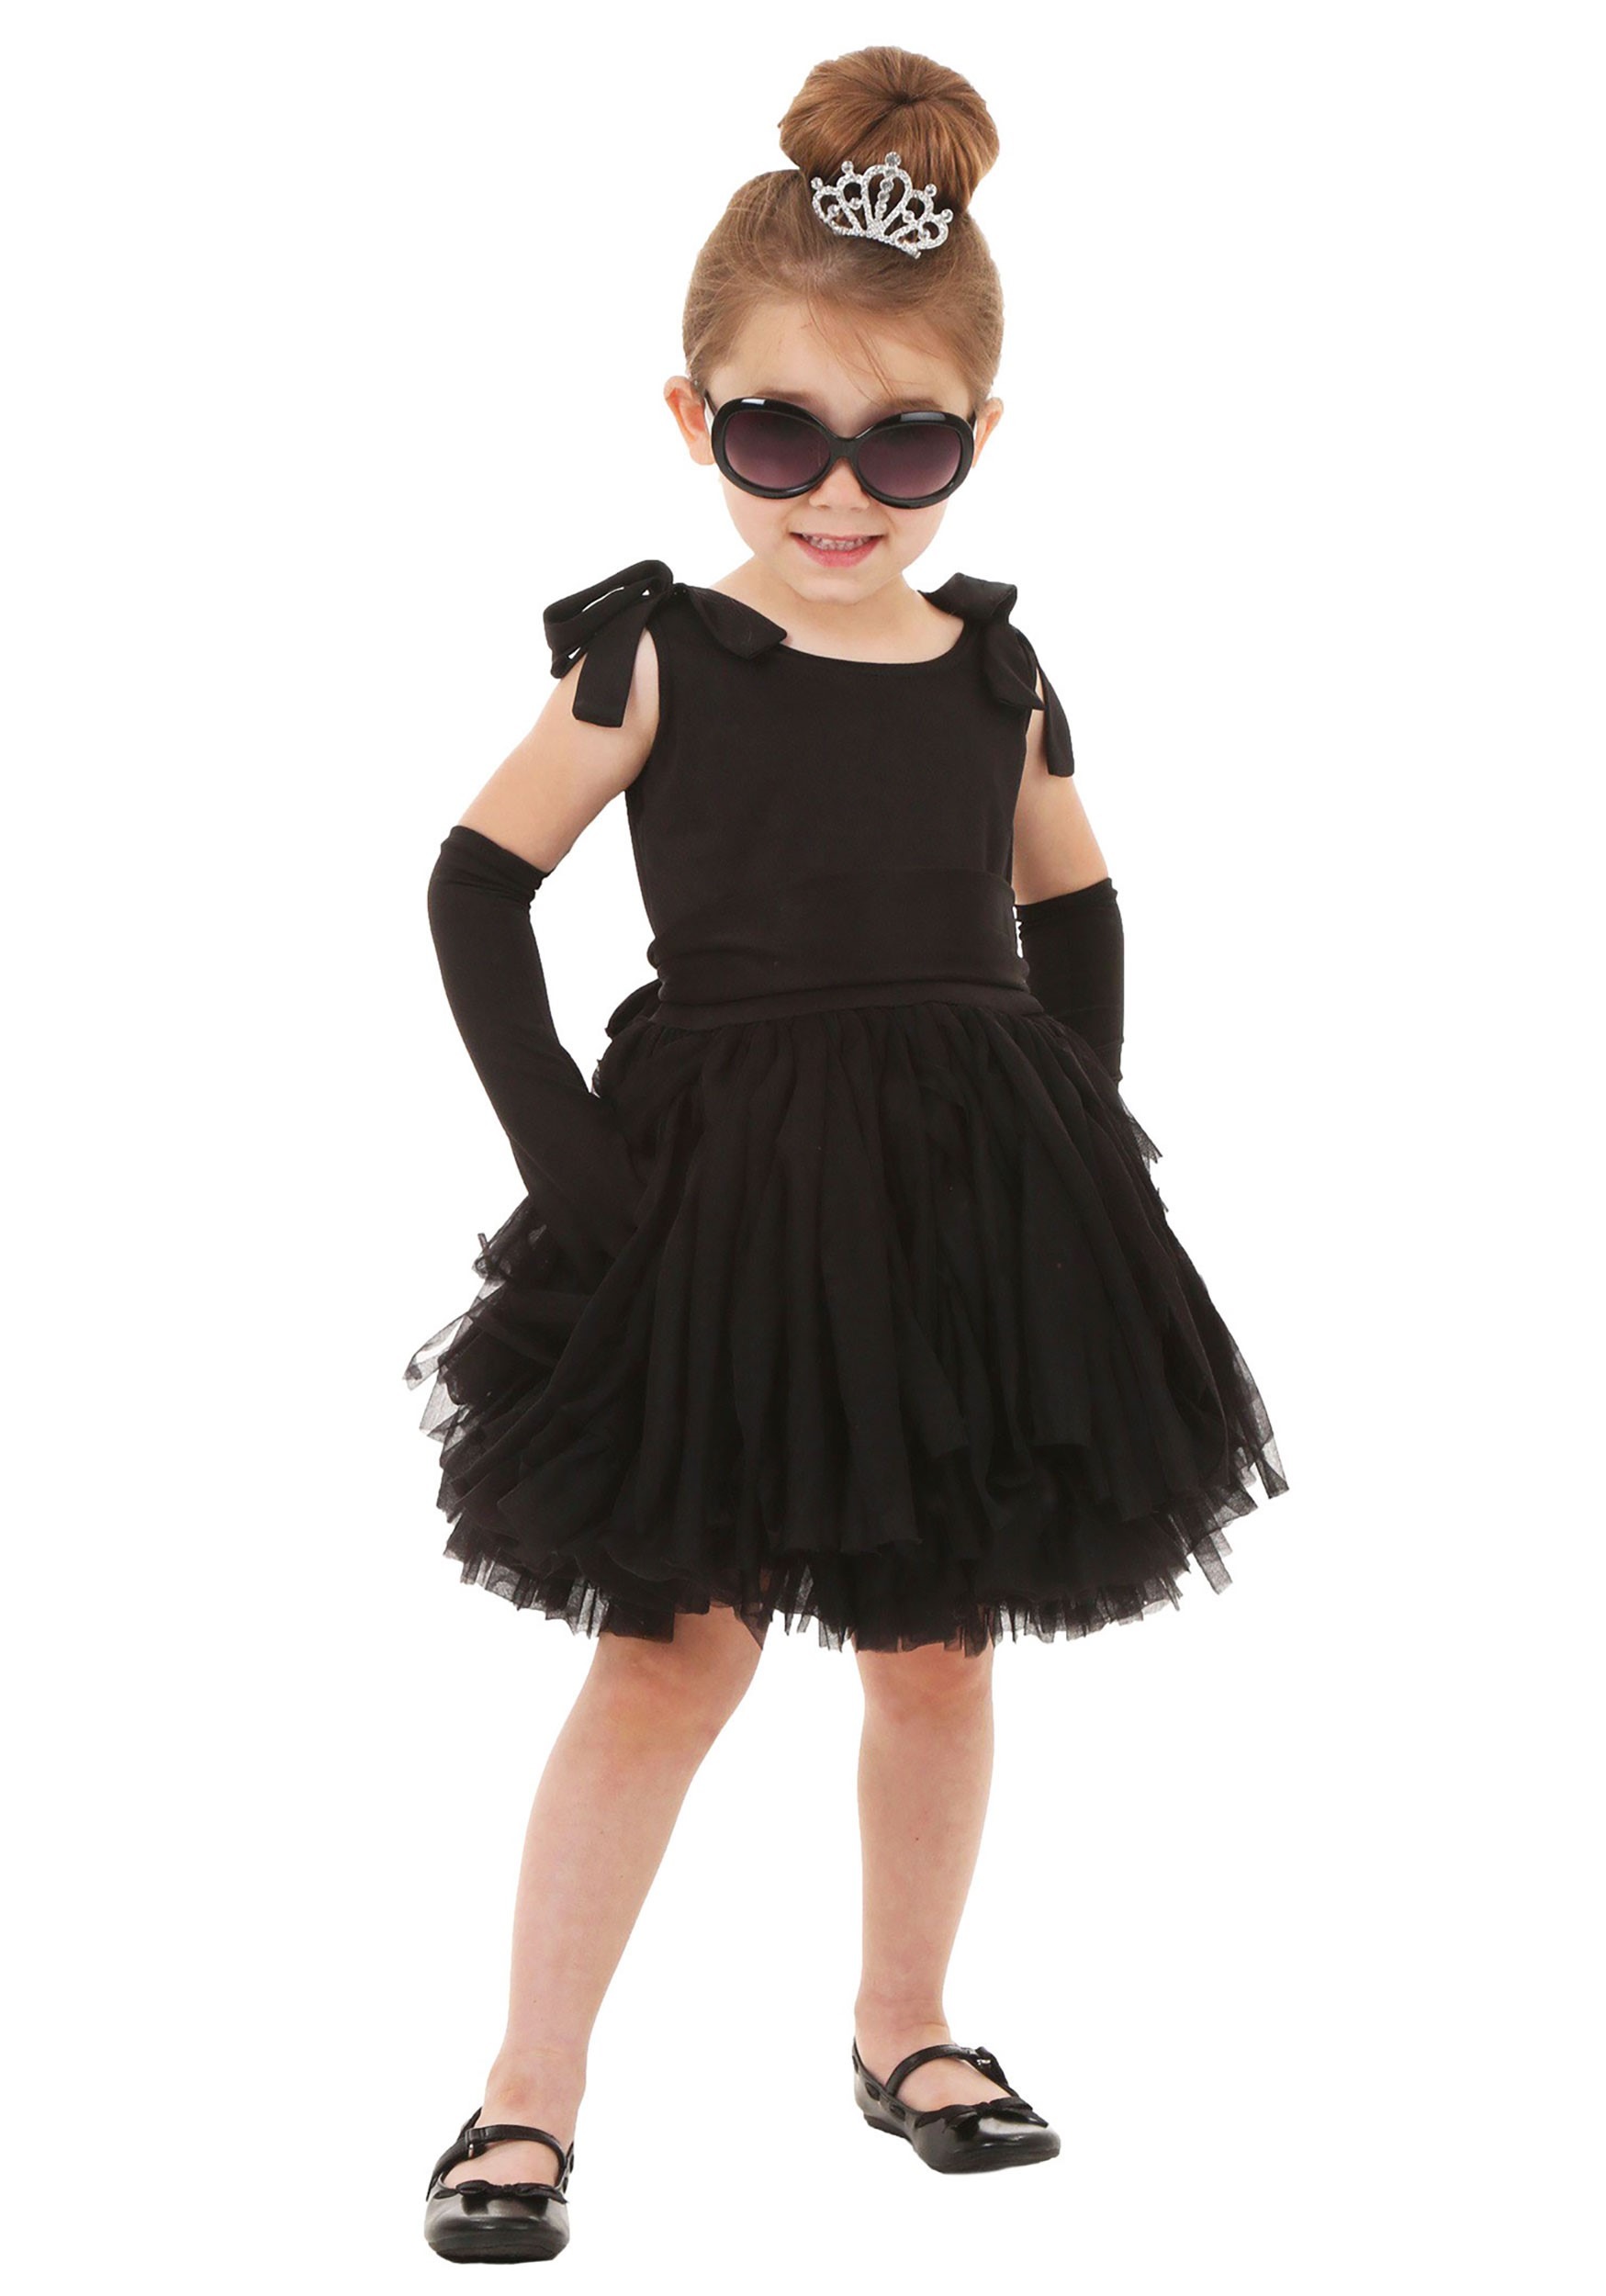 Breakfast at Tiffany's Holly Golightly Toddler Costume